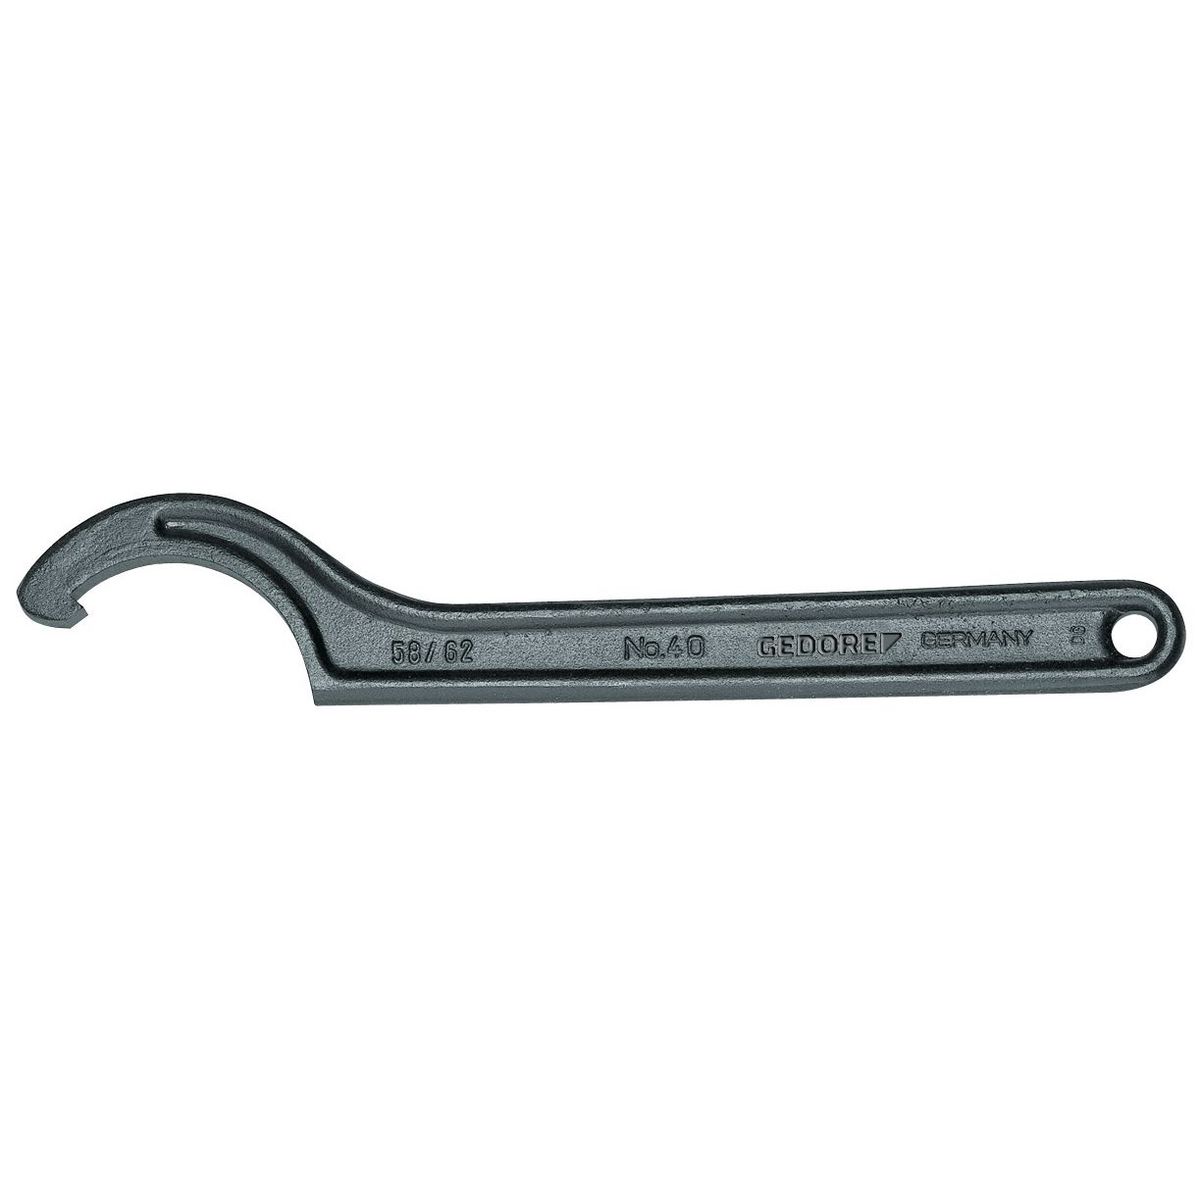 Hook wrench with lug, 68-75mm No.40 68-75 Gedore